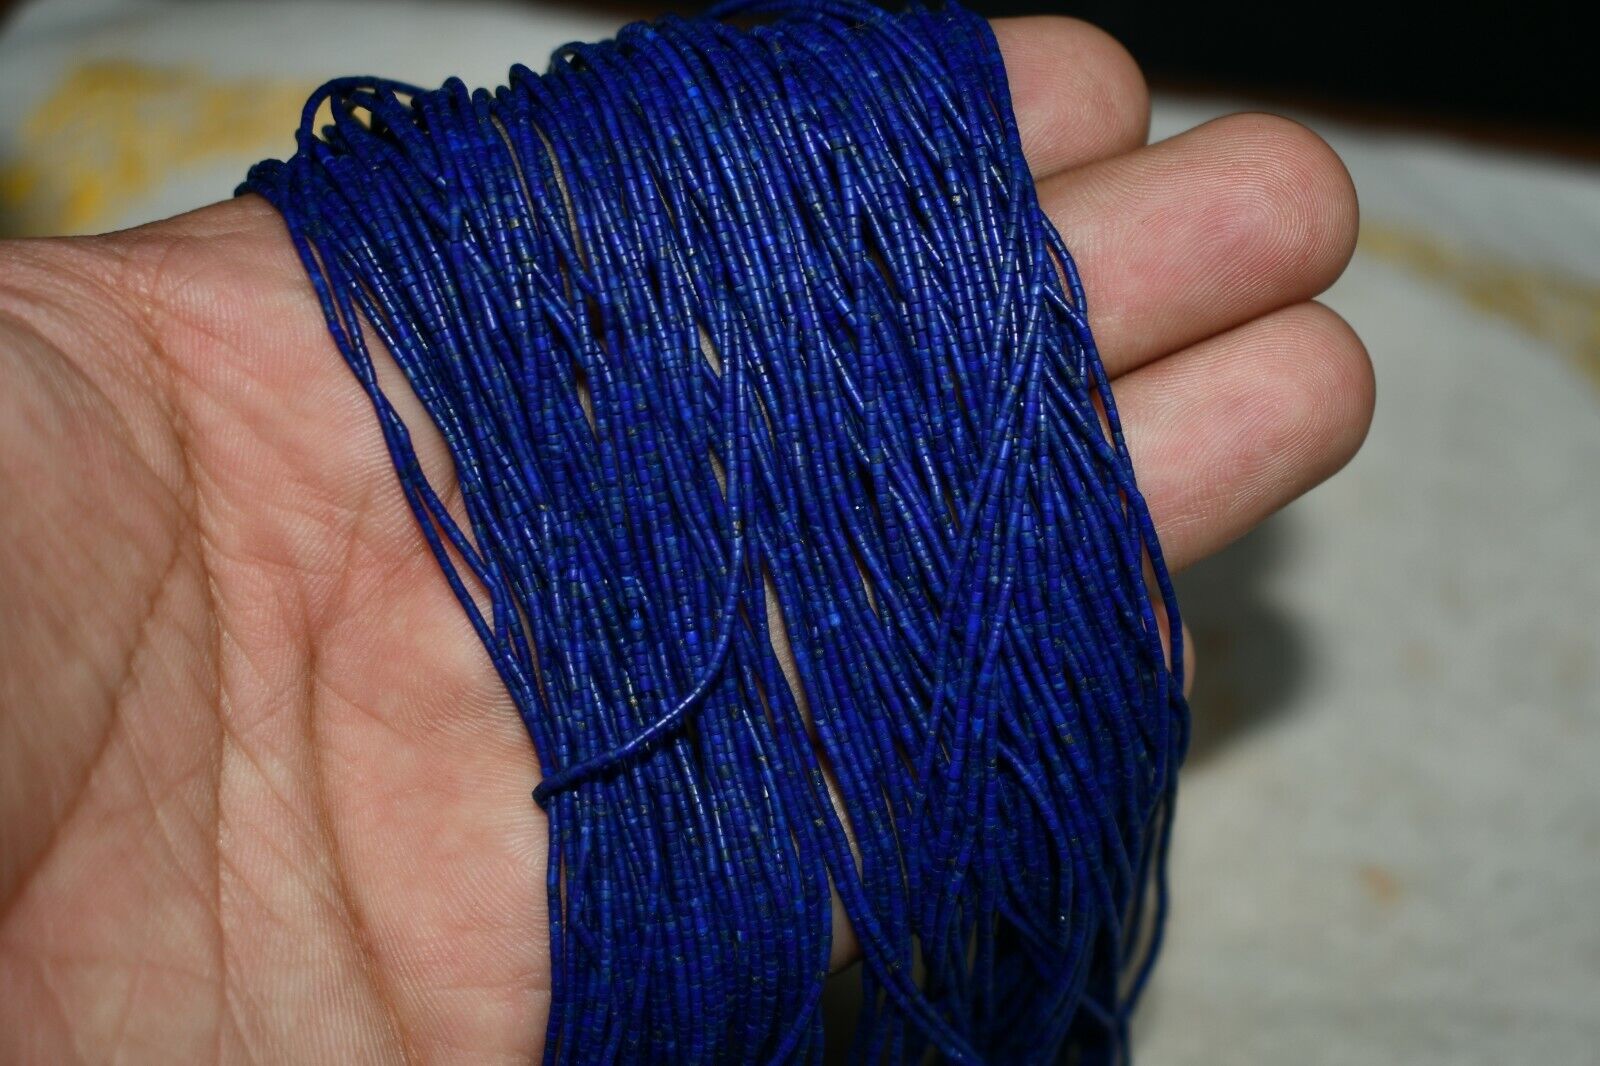 50 Strands of Authentic Natural Lapis Lazuli Stone Beads from Afghanistan 